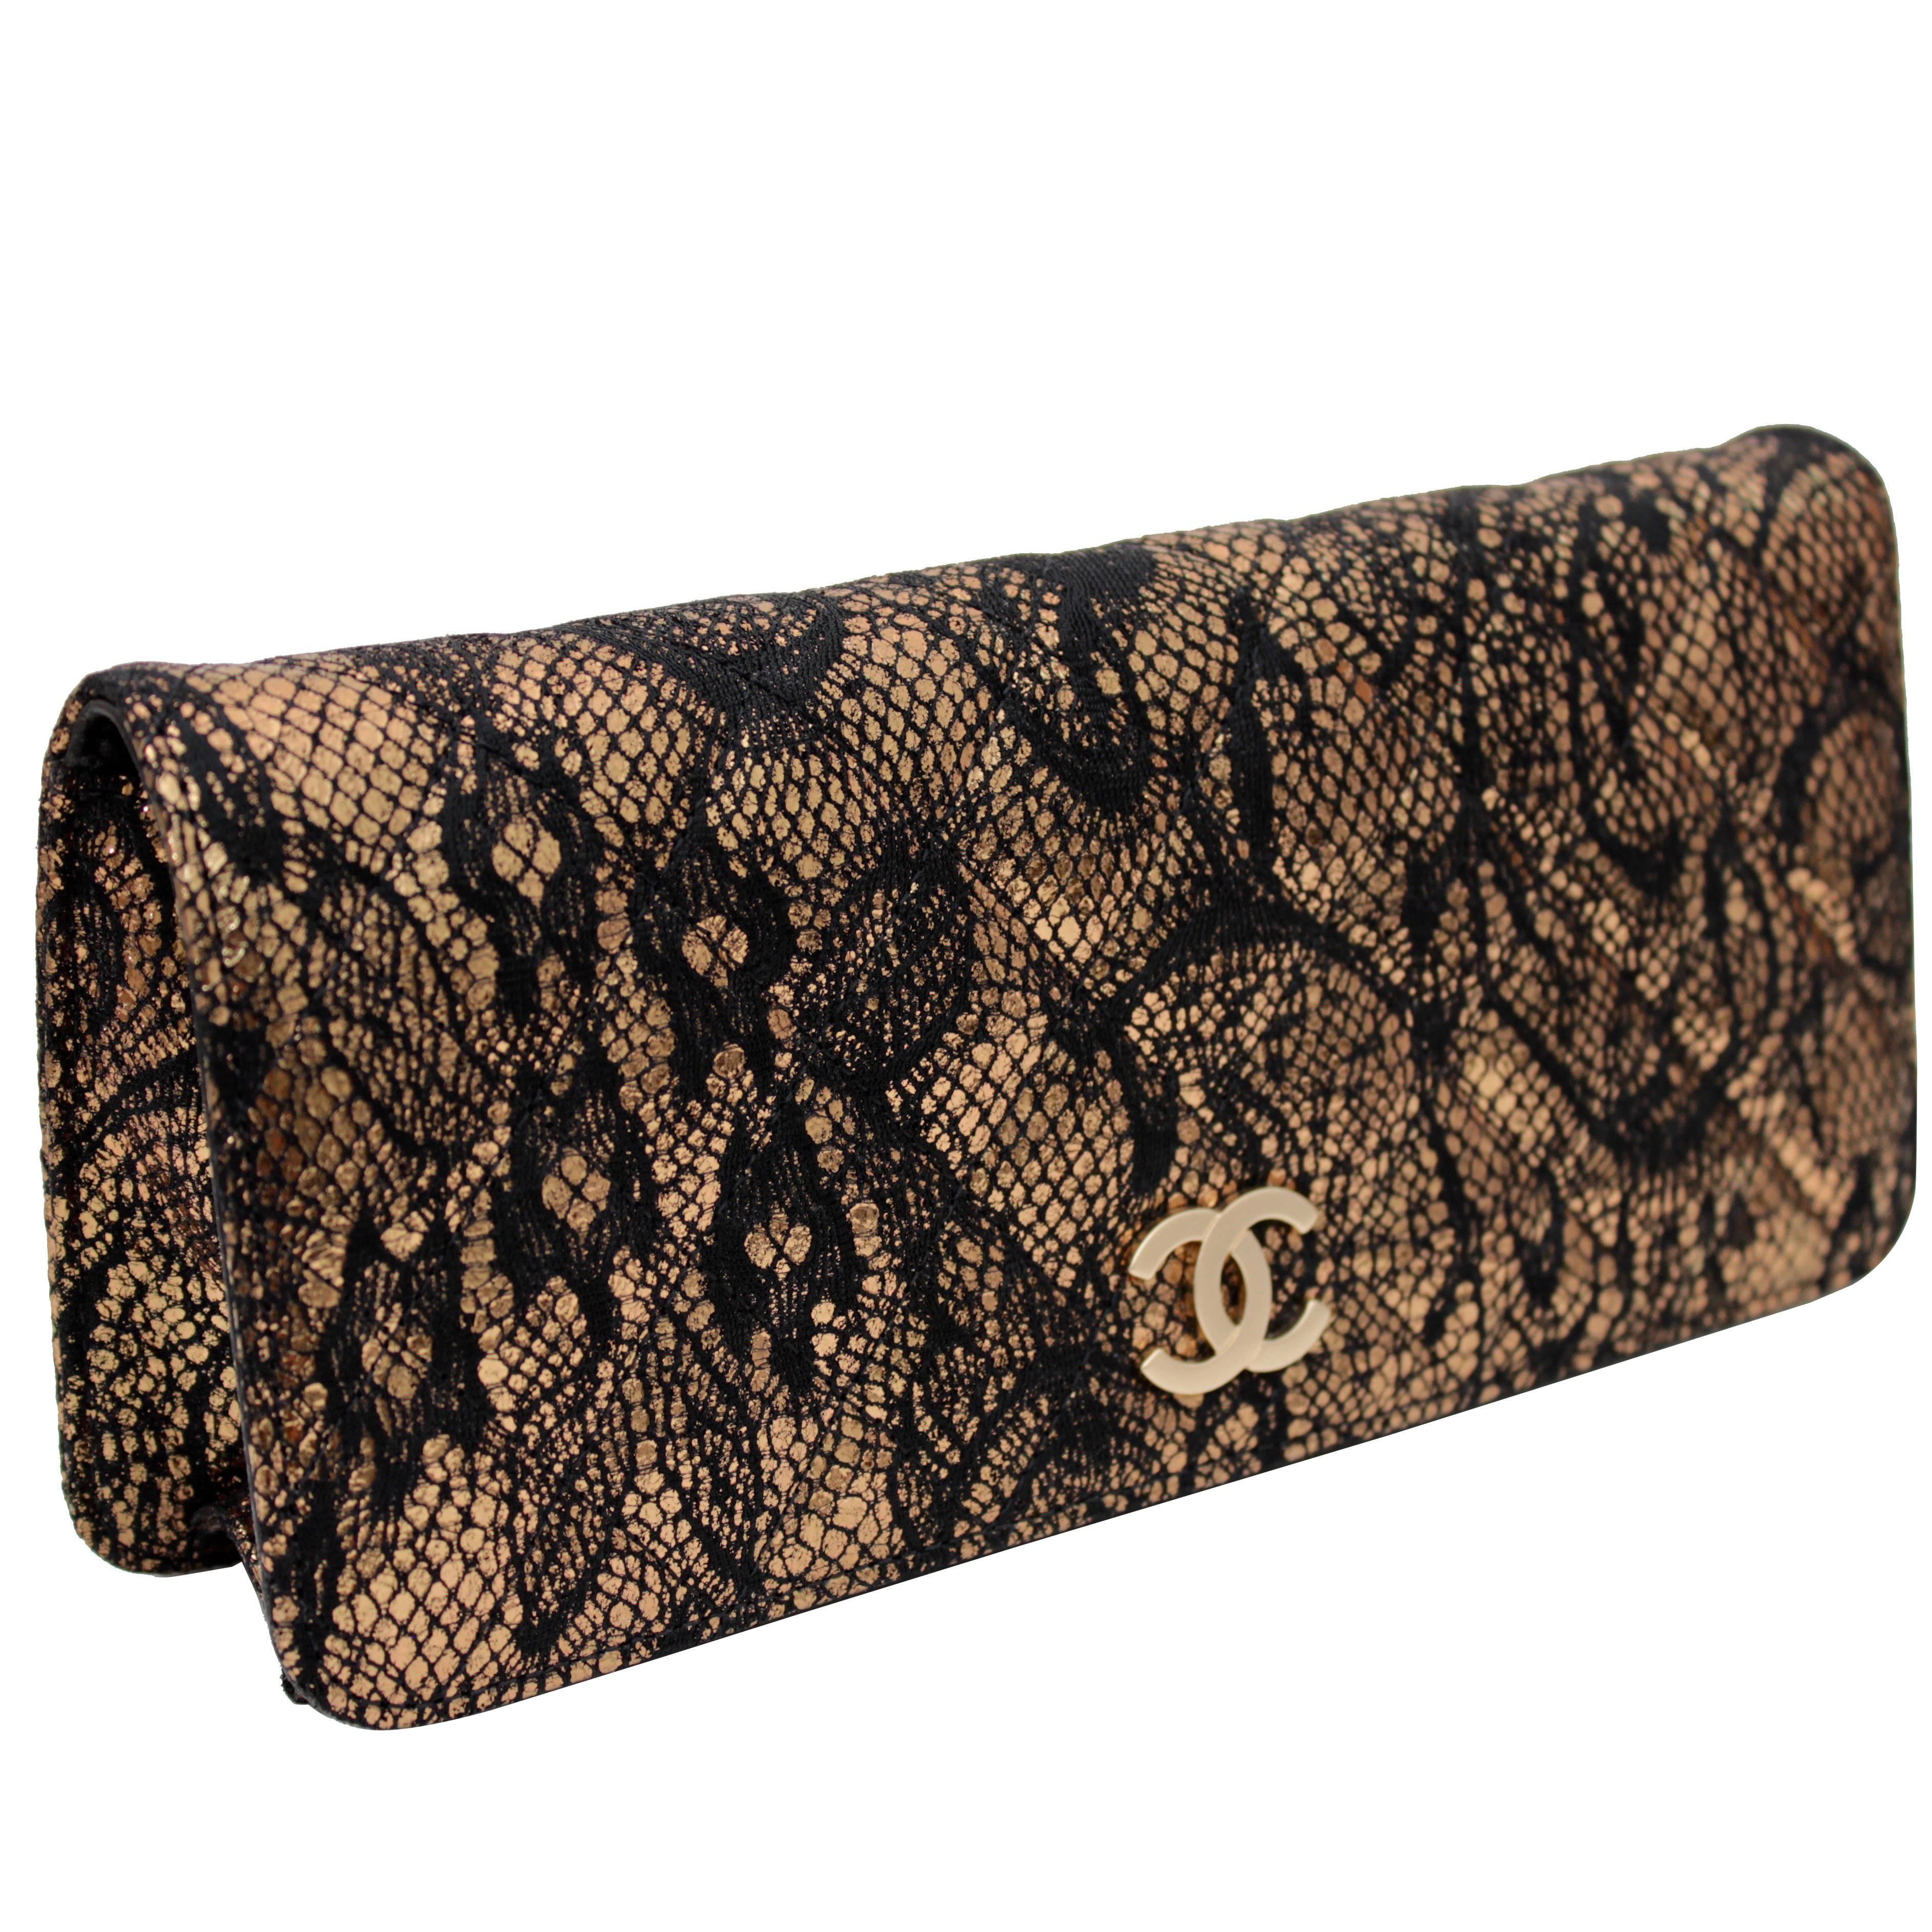 Chanel Metallic Gold Leather and Black Lace Clutch Matelasse Evening Bag 2010 